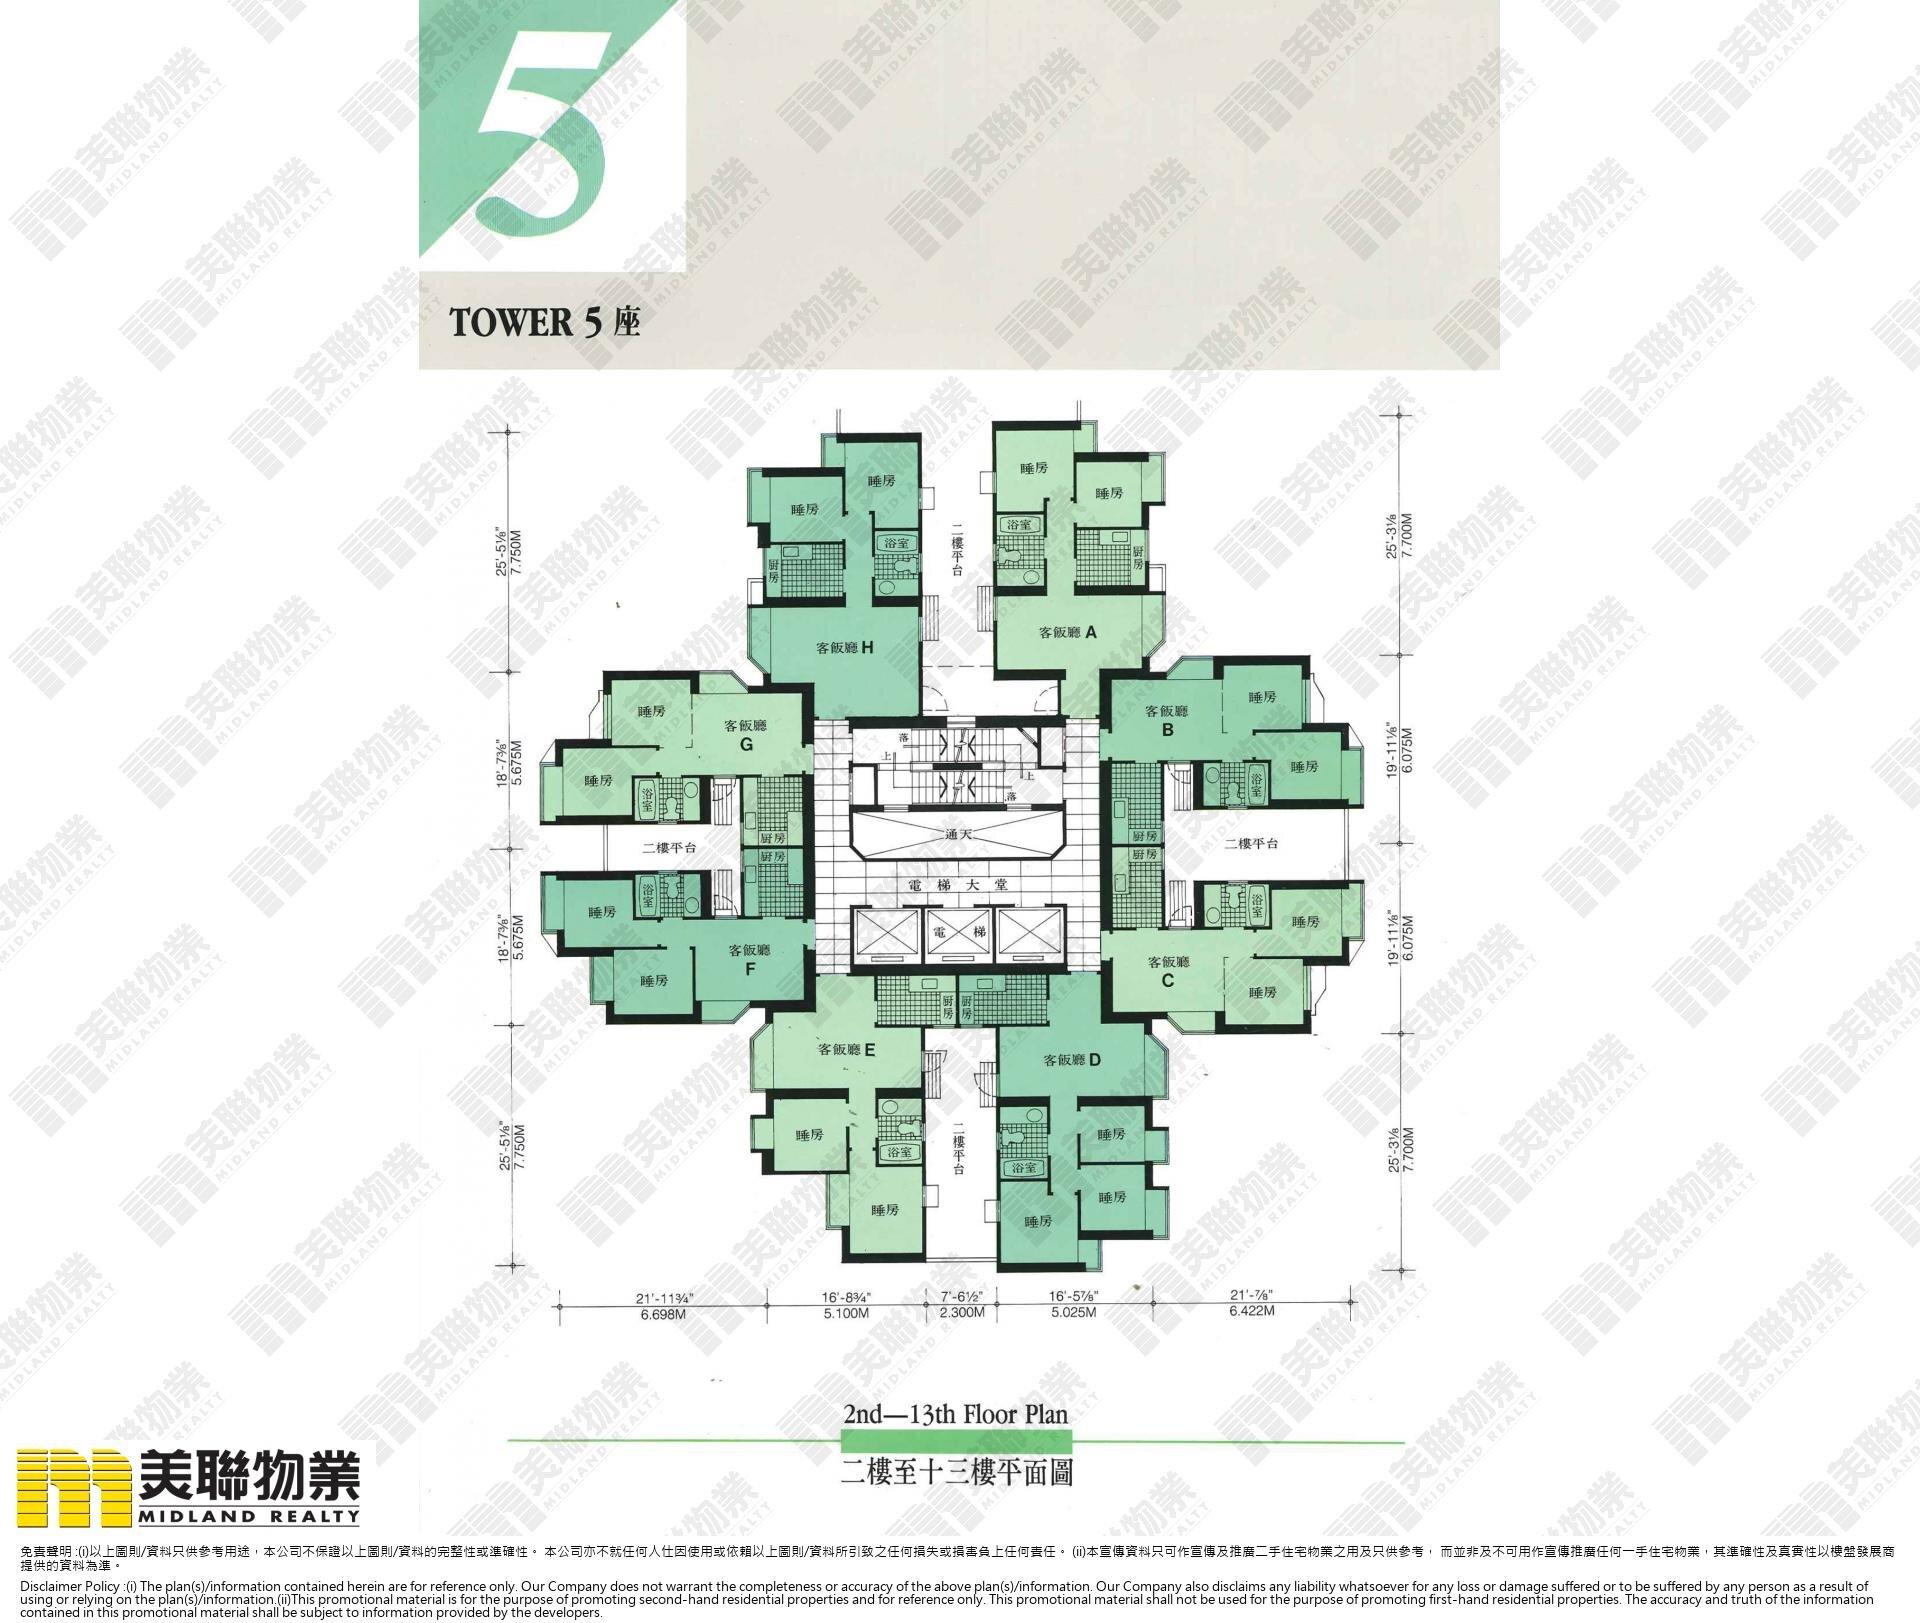 GREENFIELD GARDEN Tsing Yi Estate Page Midland Realty